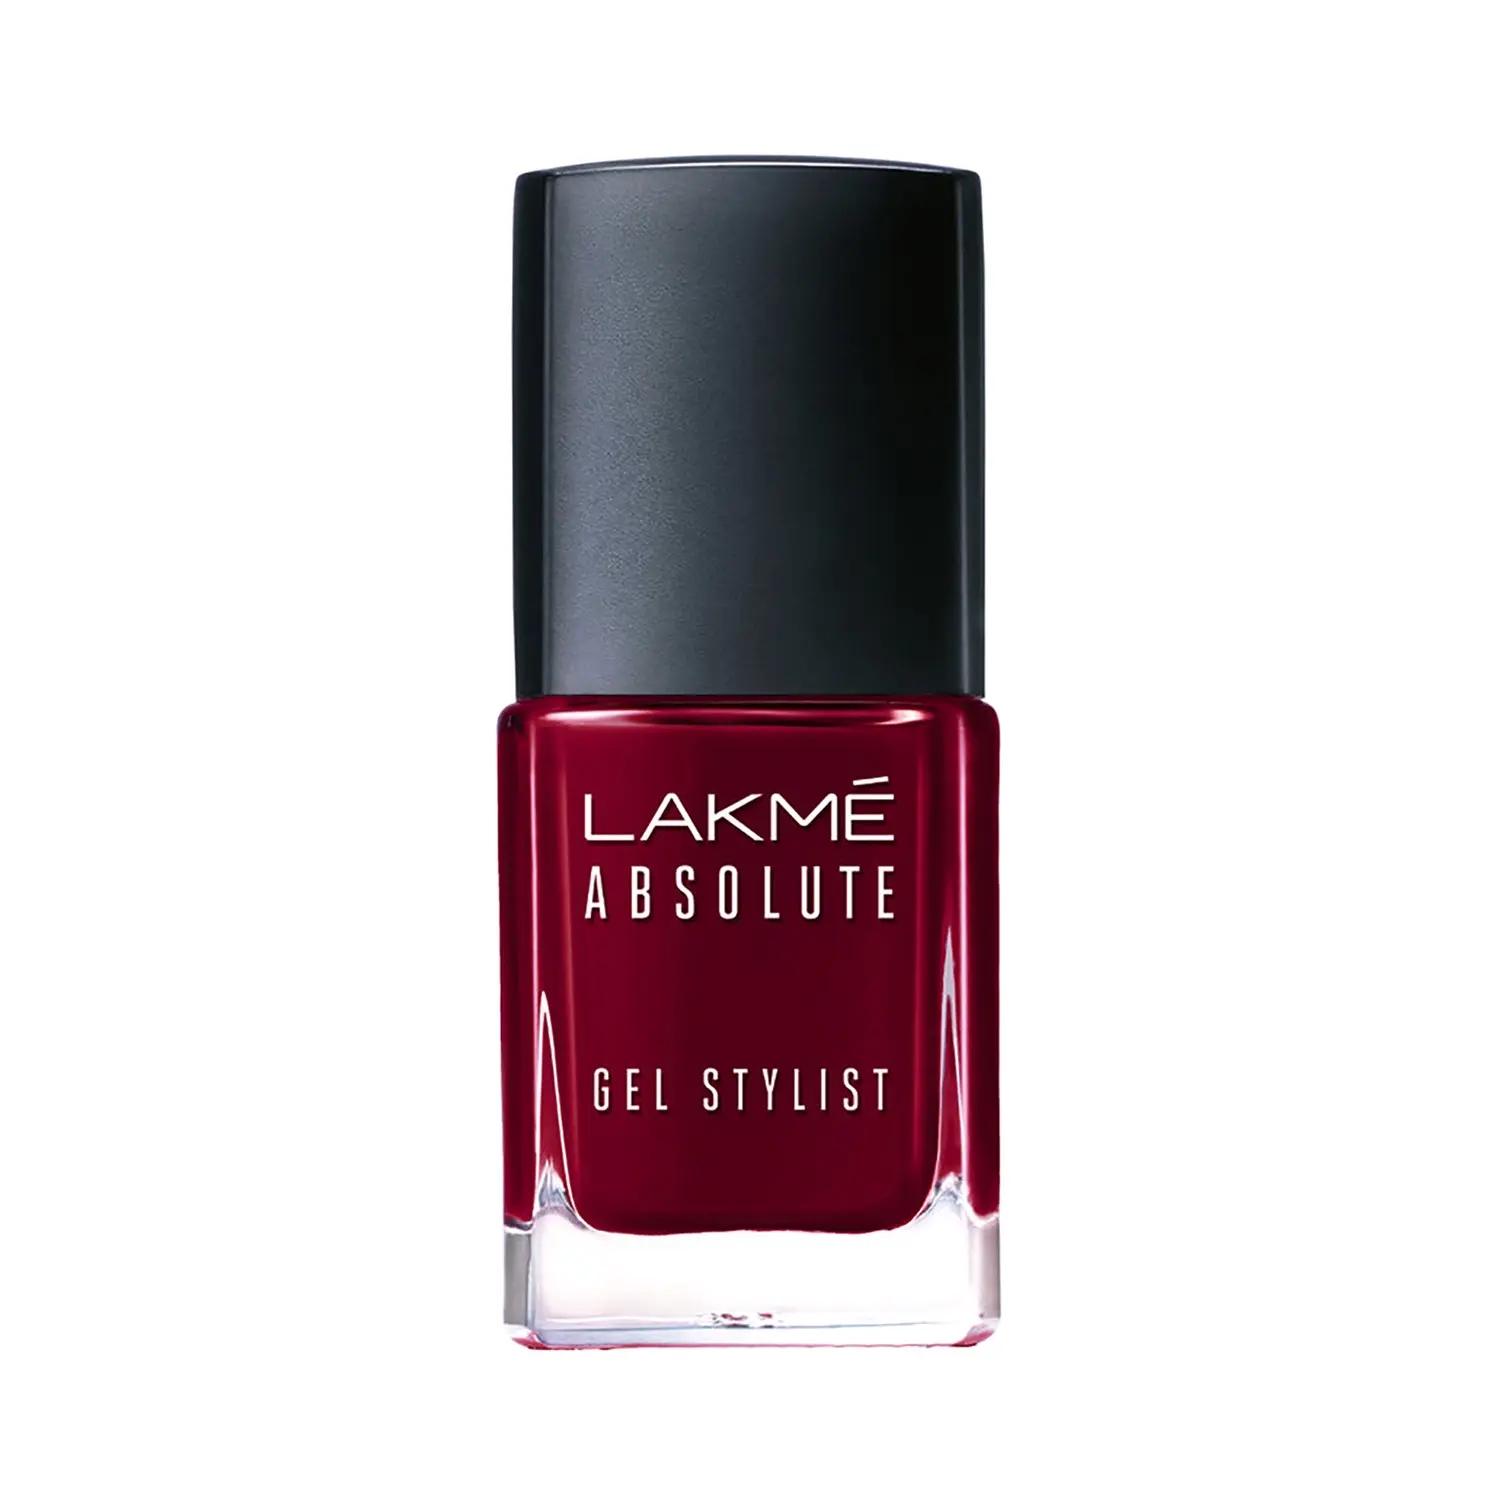 Lakme Absolute Gel Stylist Nail Color - Warrior (12ml)